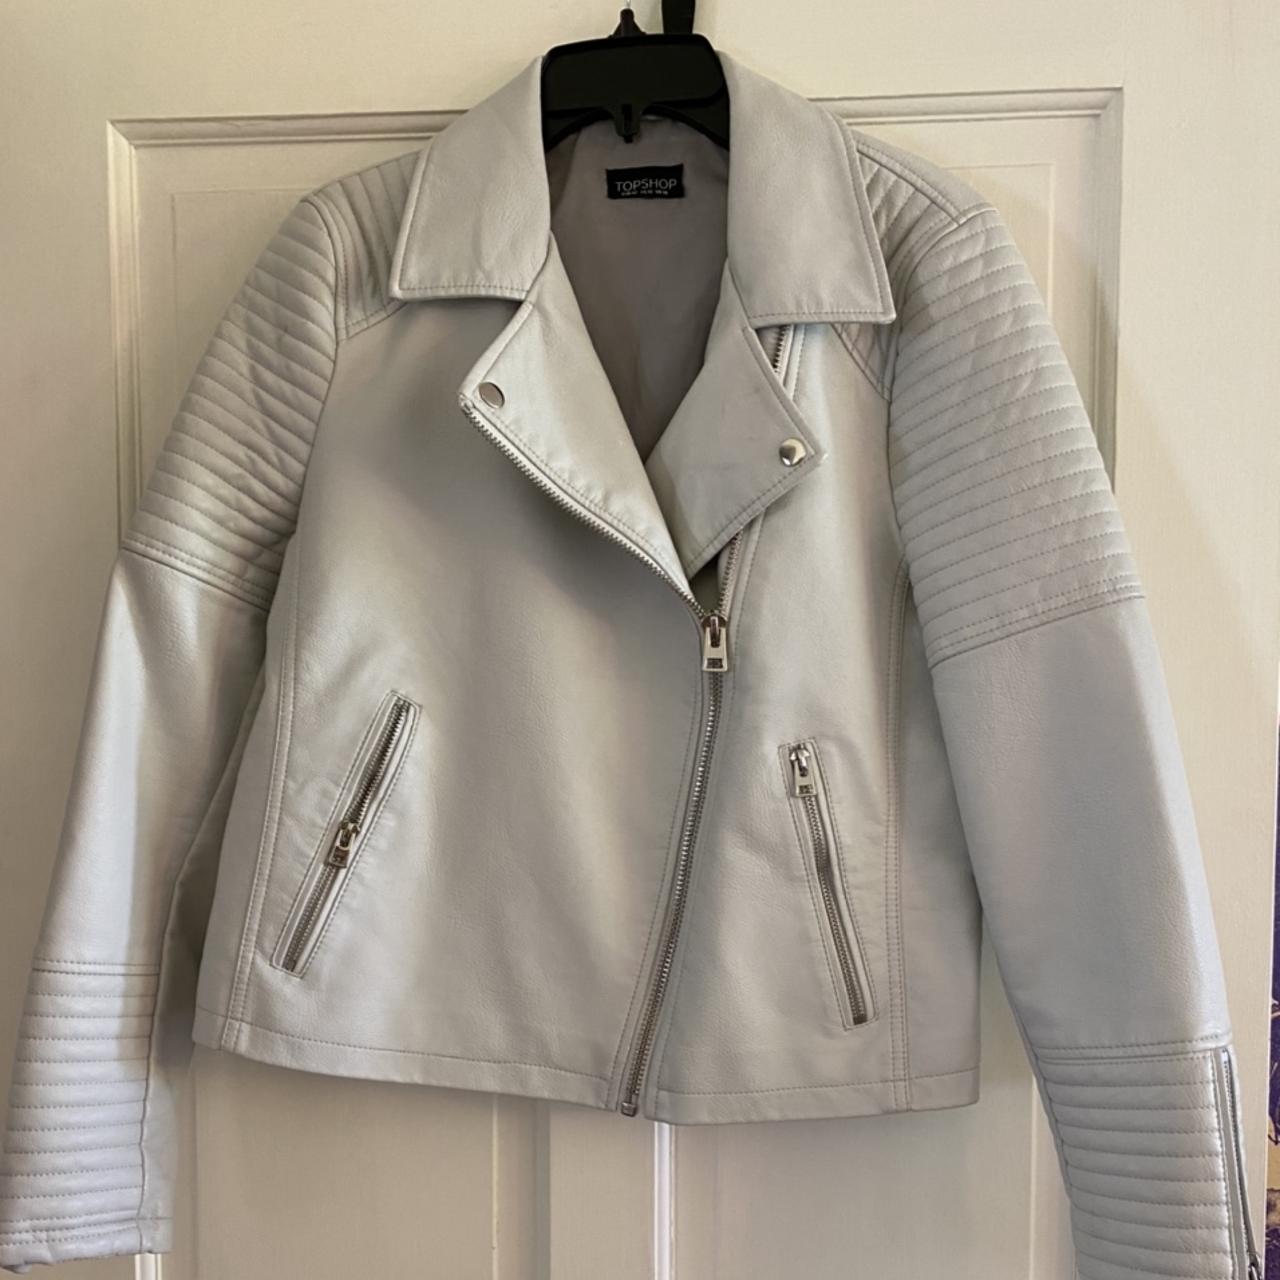 Topshop, Jackets & Coats, Nwt Topshop Maternity Off White Faux Leather  Shacket Size